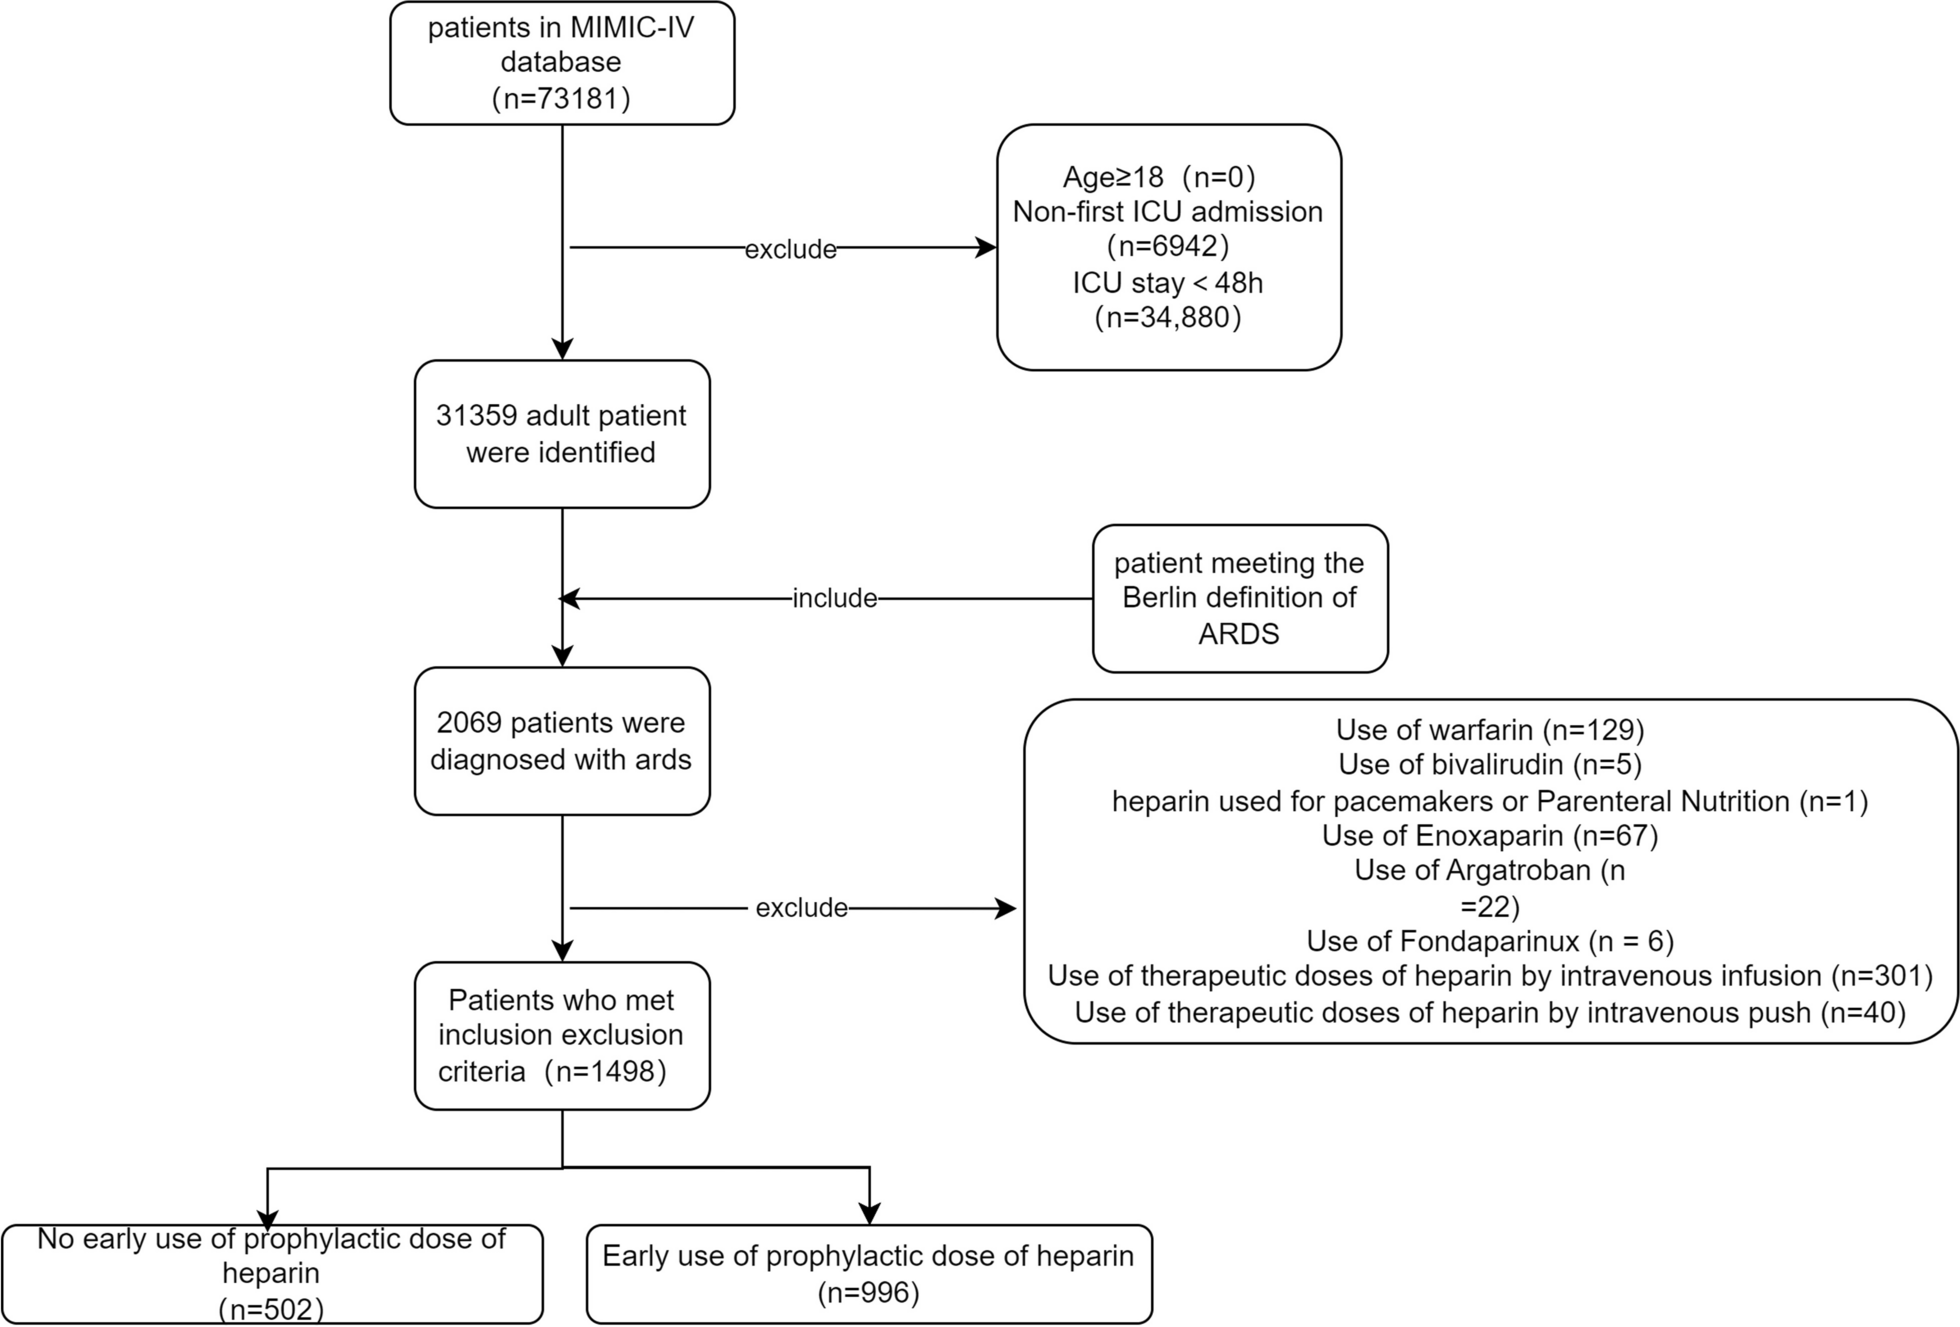 Exploring the therapeutic role of early heparin administration in ARDS management: a MIMIC-IV database analysis